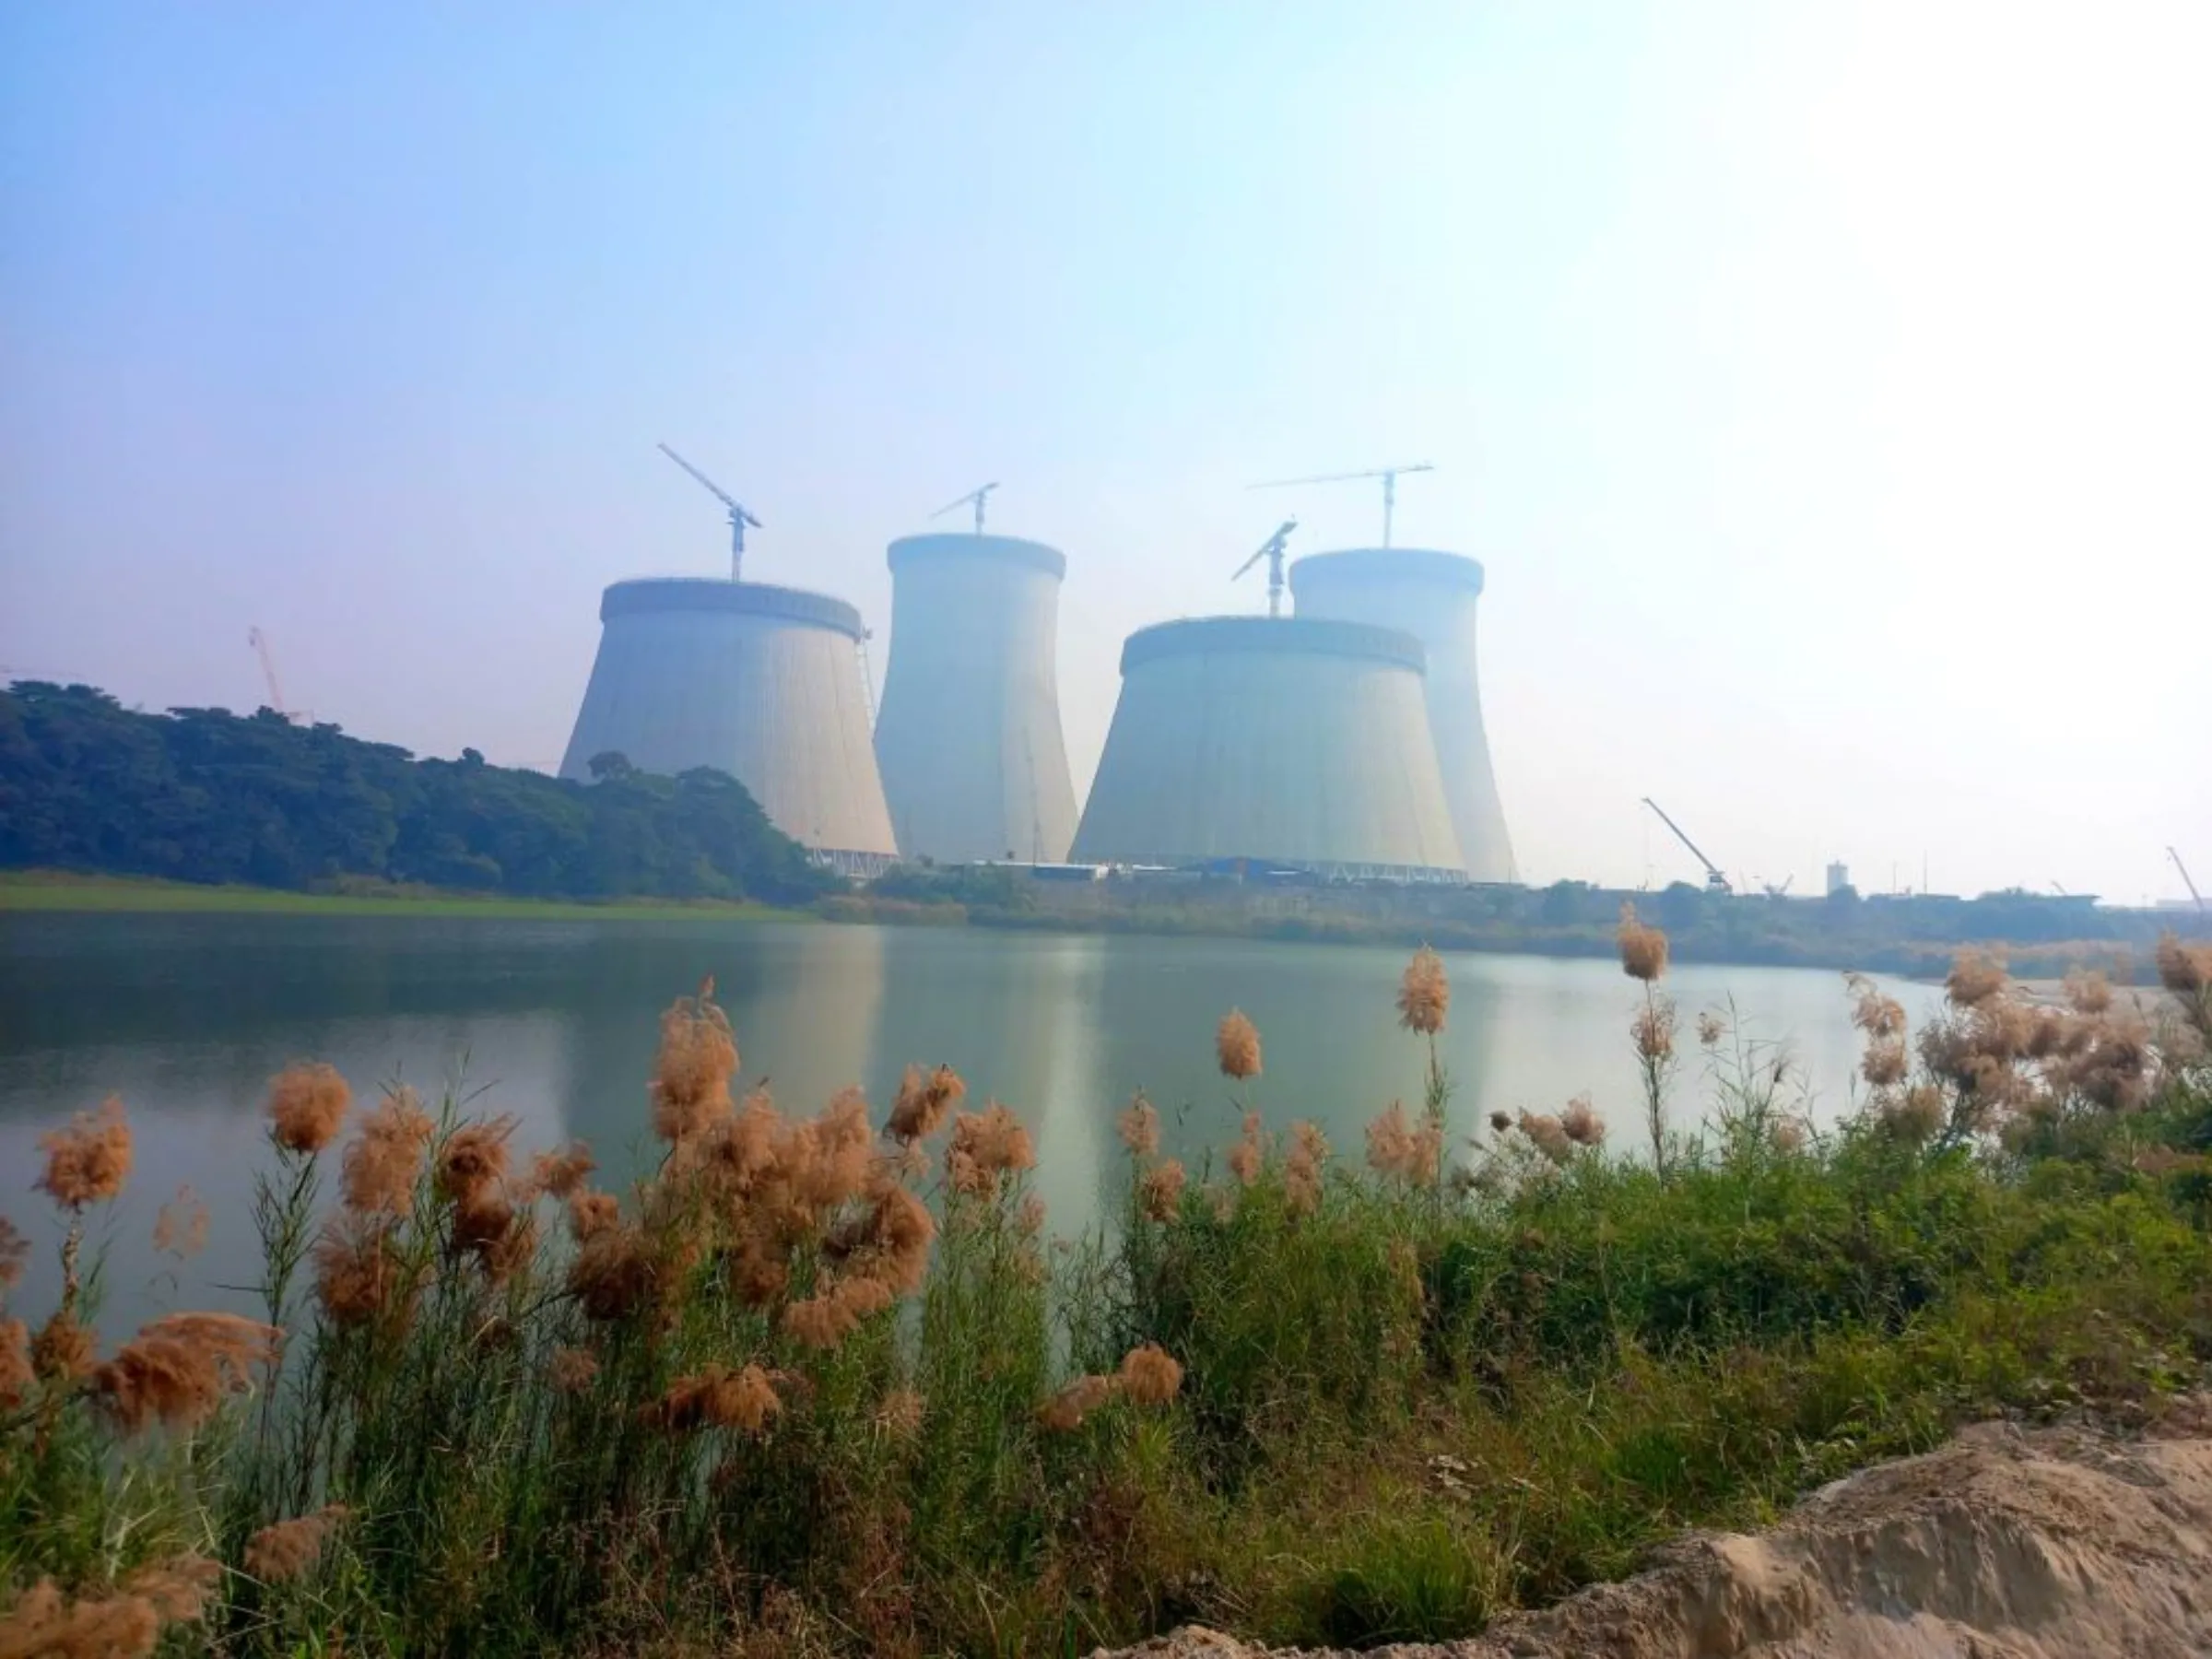 The Rooppur nuclear plant is being built at the bank of the Padma River, Pabna, Bangladesh, 15 December 2022